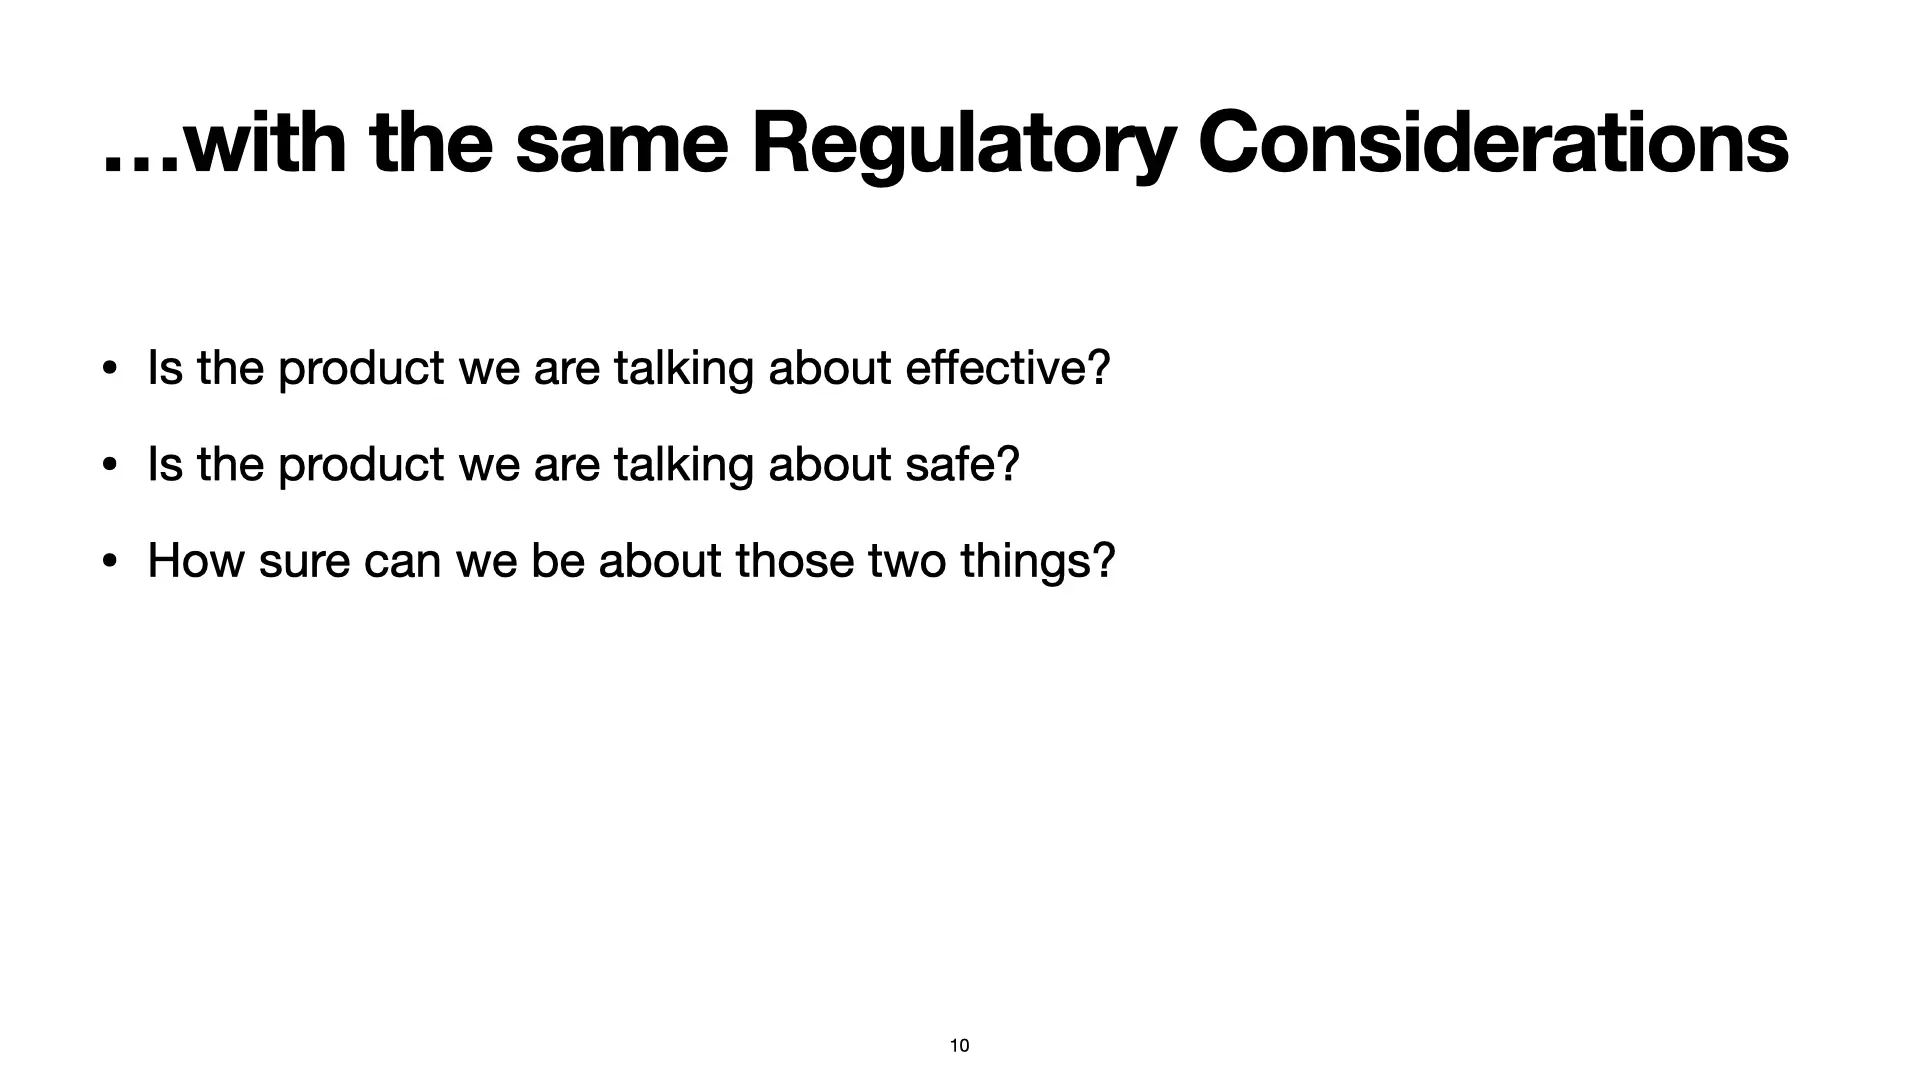 Slide 10: ...with the same Regulatory Considerations. Is the product we are talking about effective? Is the product we are talking about safe? How sure can we be about those two things?